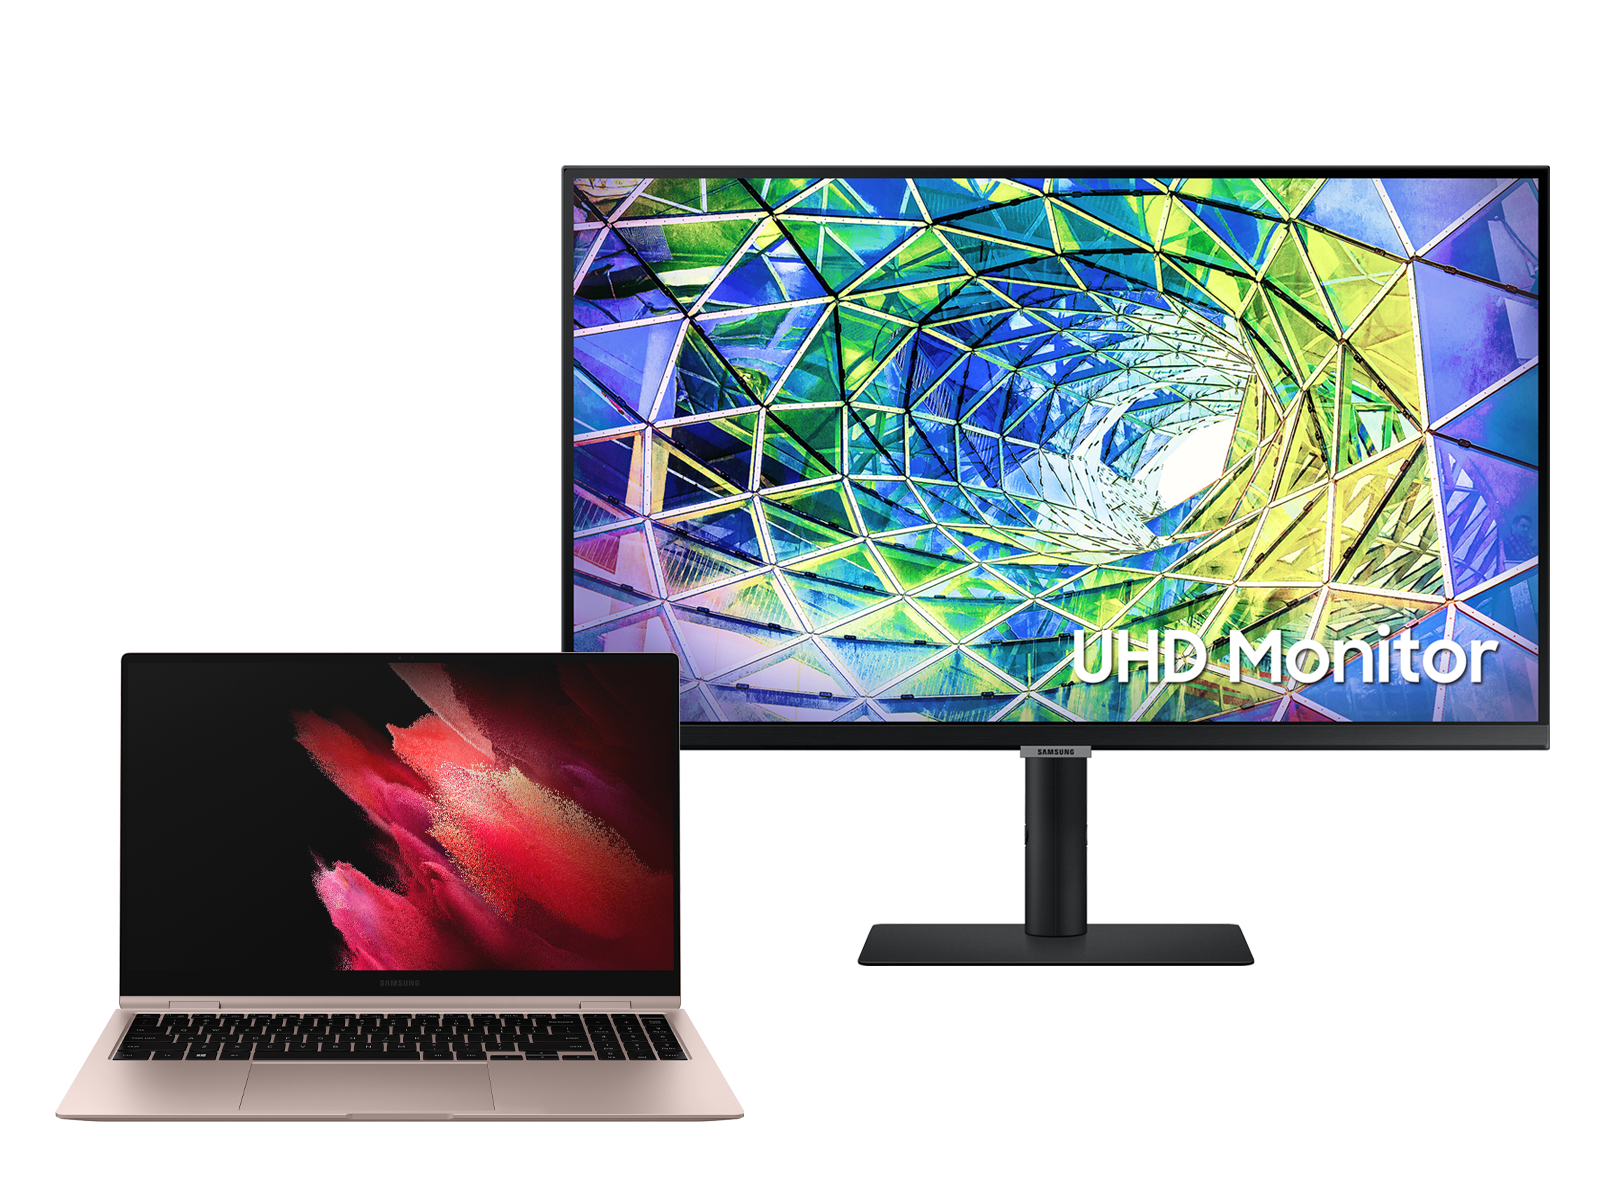 Thumbnail image of Galaxy Book Pro 360, 15”, 1TB, Bronze and 27” UHD High Res Monitor with USB-C Bundle